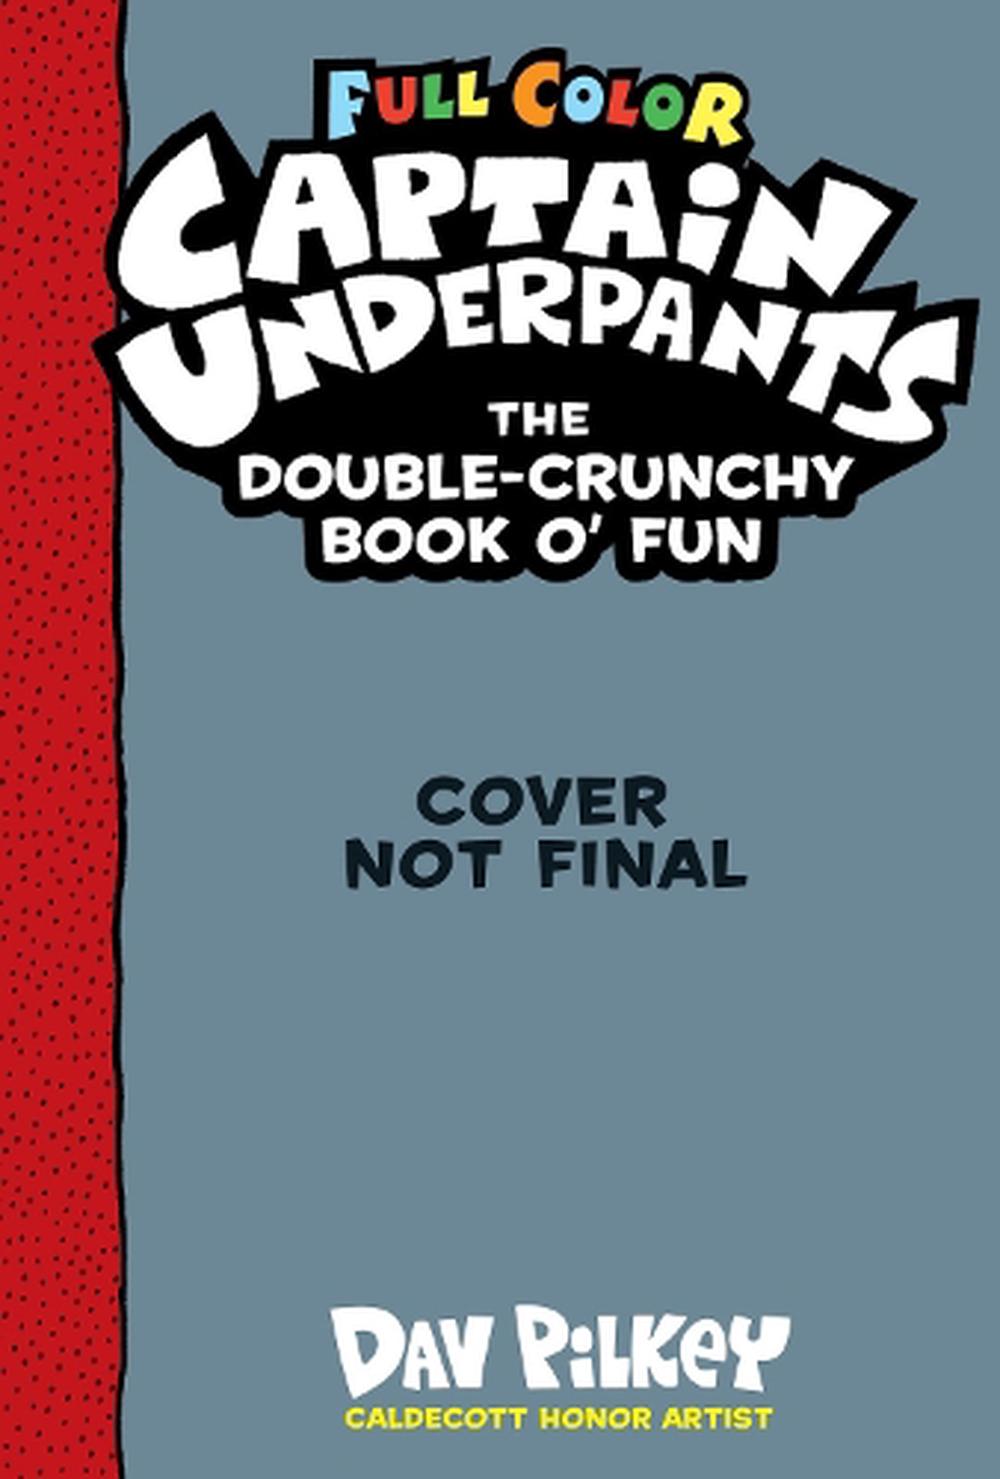 The Captain Underpants Double-Crunchy Book o' Fun (Full Color) by Dav  Pilkey, Hardcover, 9781338814491